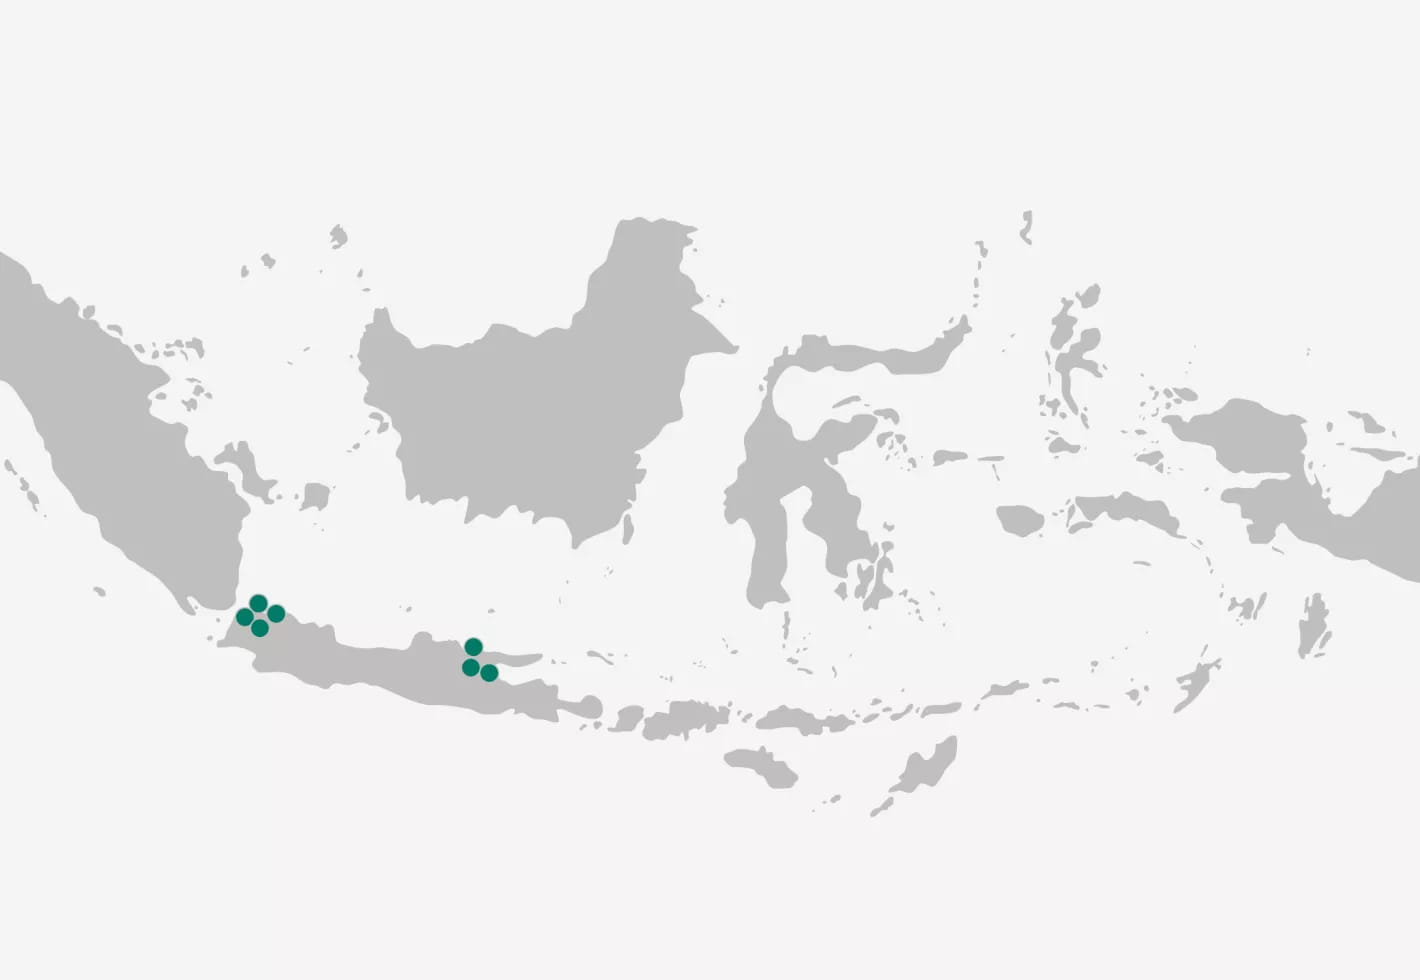 Our presence in Indonesia